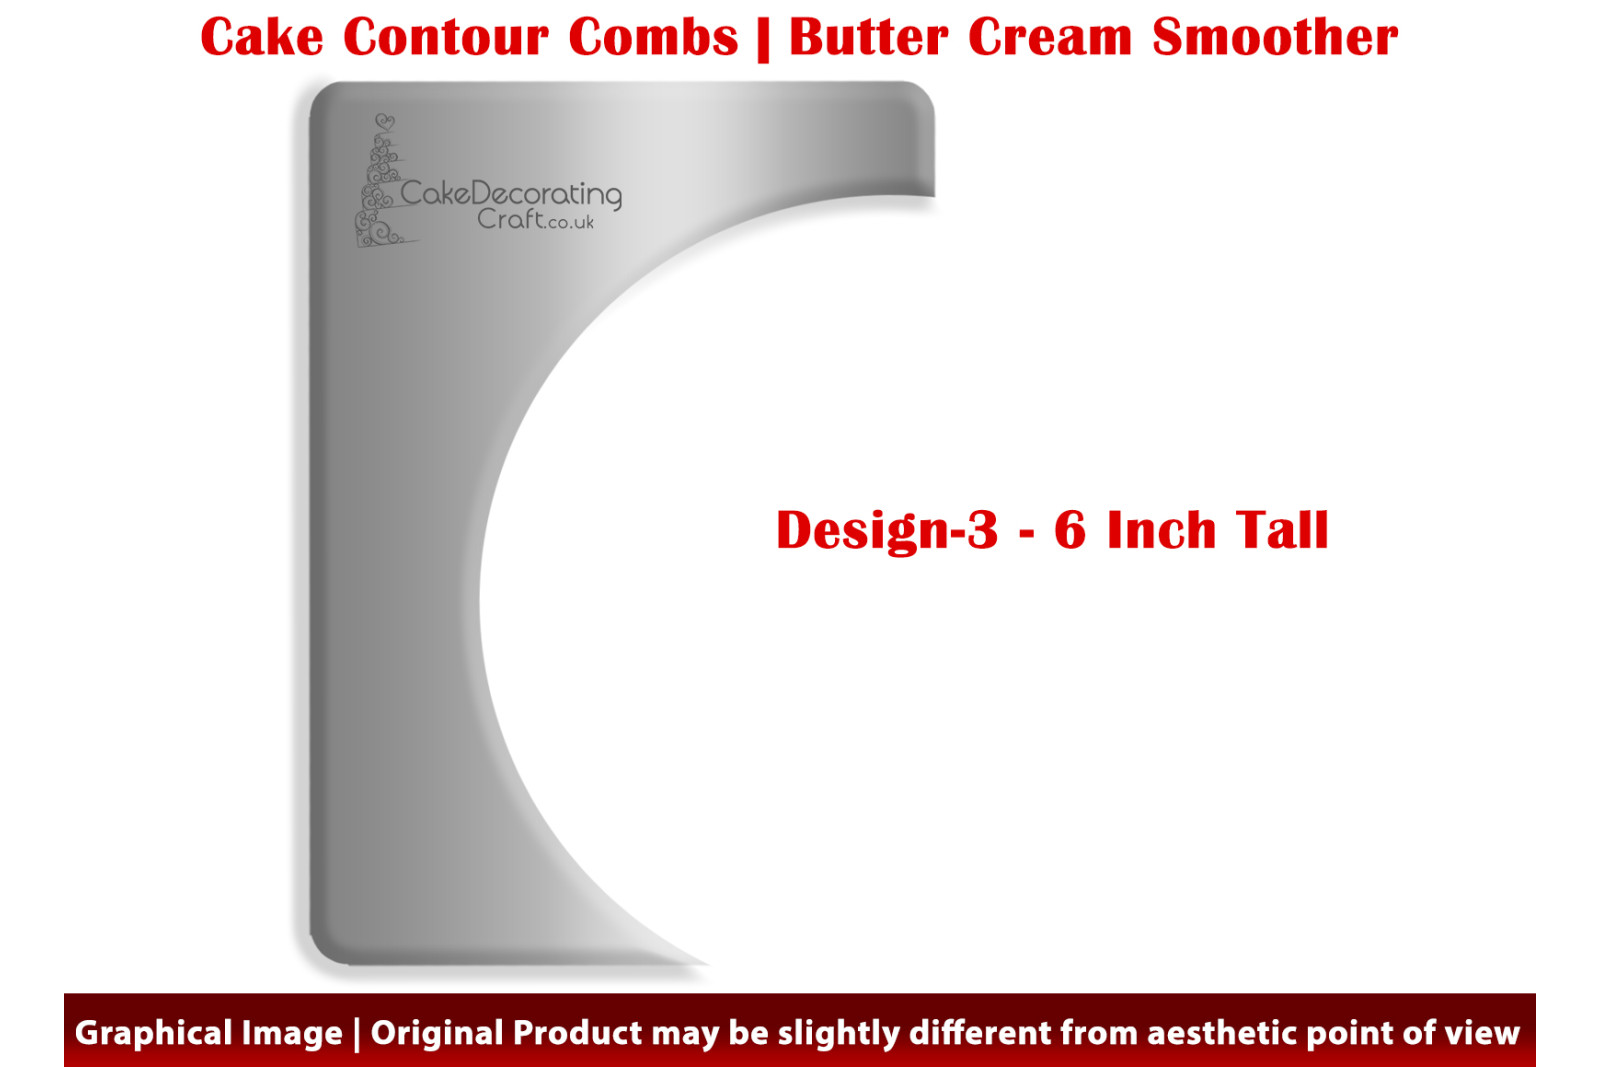 Spherical Miracle | Design 3 | 6 Inch | Cake Decorating Craft | Cake Contour Combs | Smoothing | Metal Spreader | Butter Cream Smoothing | Genius Tool